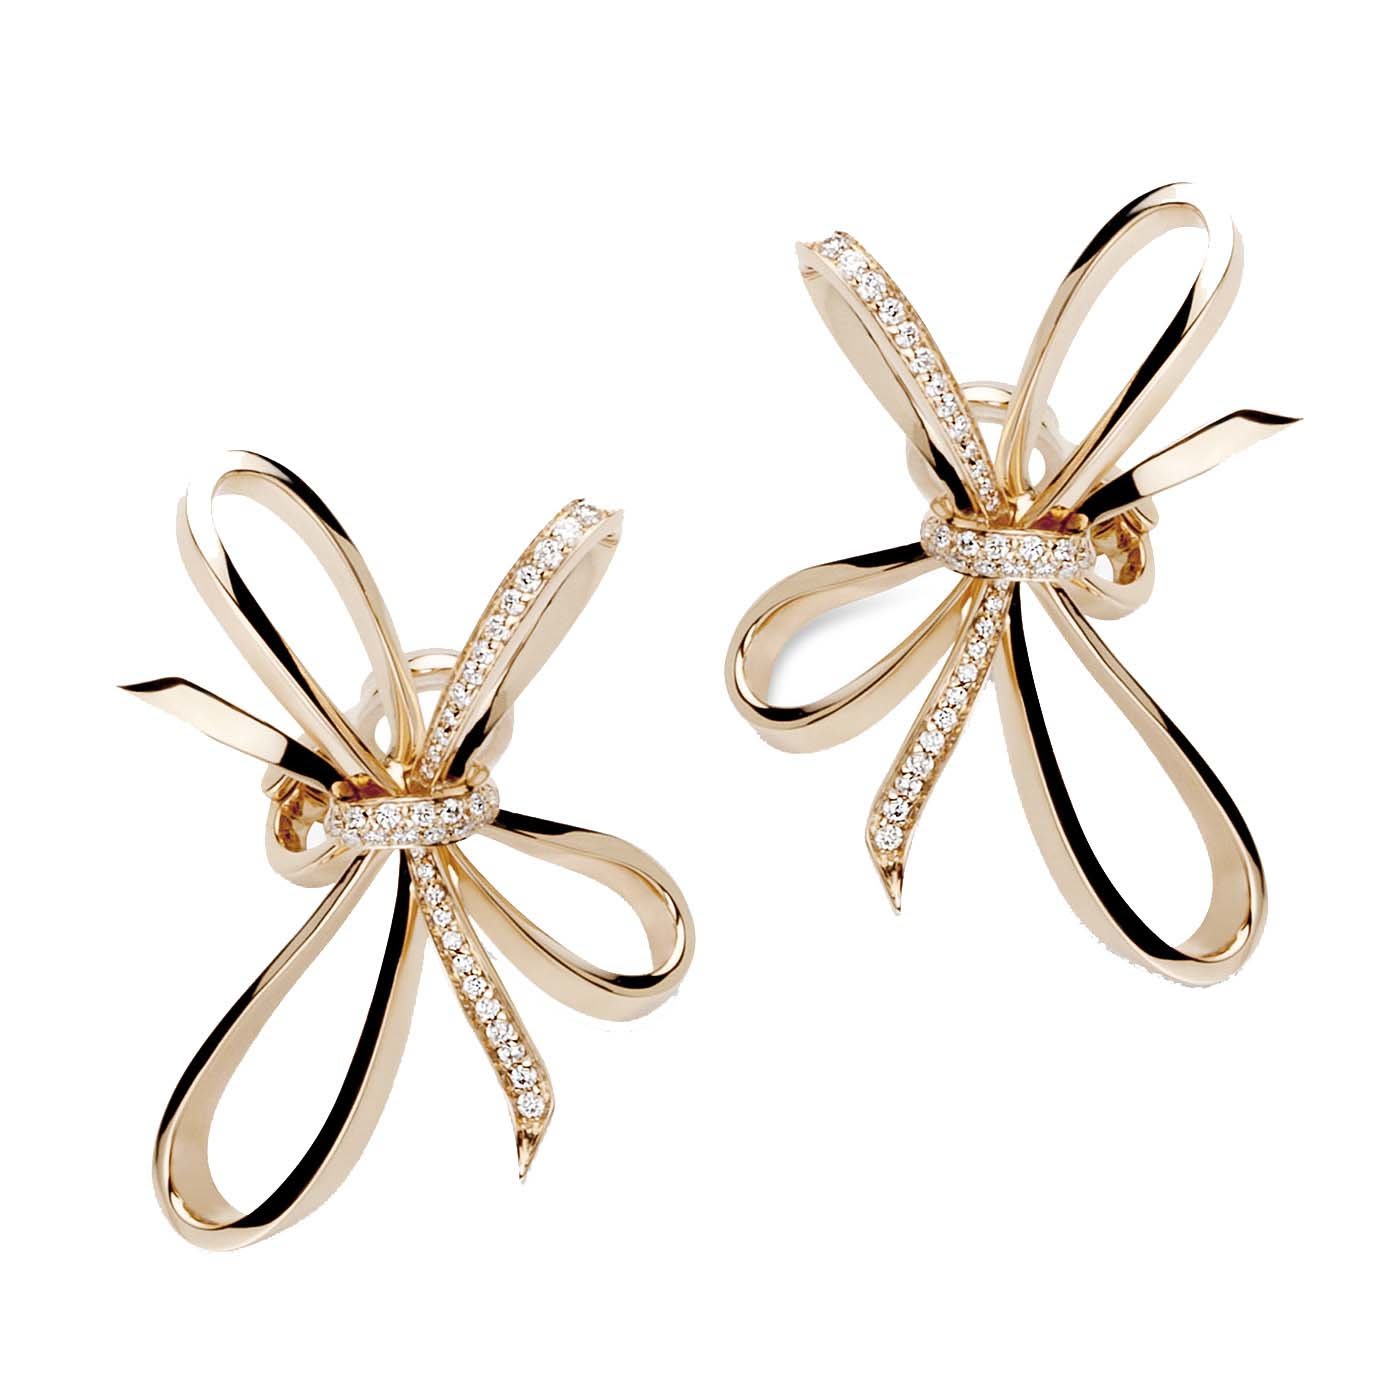 Gala Gold and Diamond Clip-On Earrings - Castrovilli